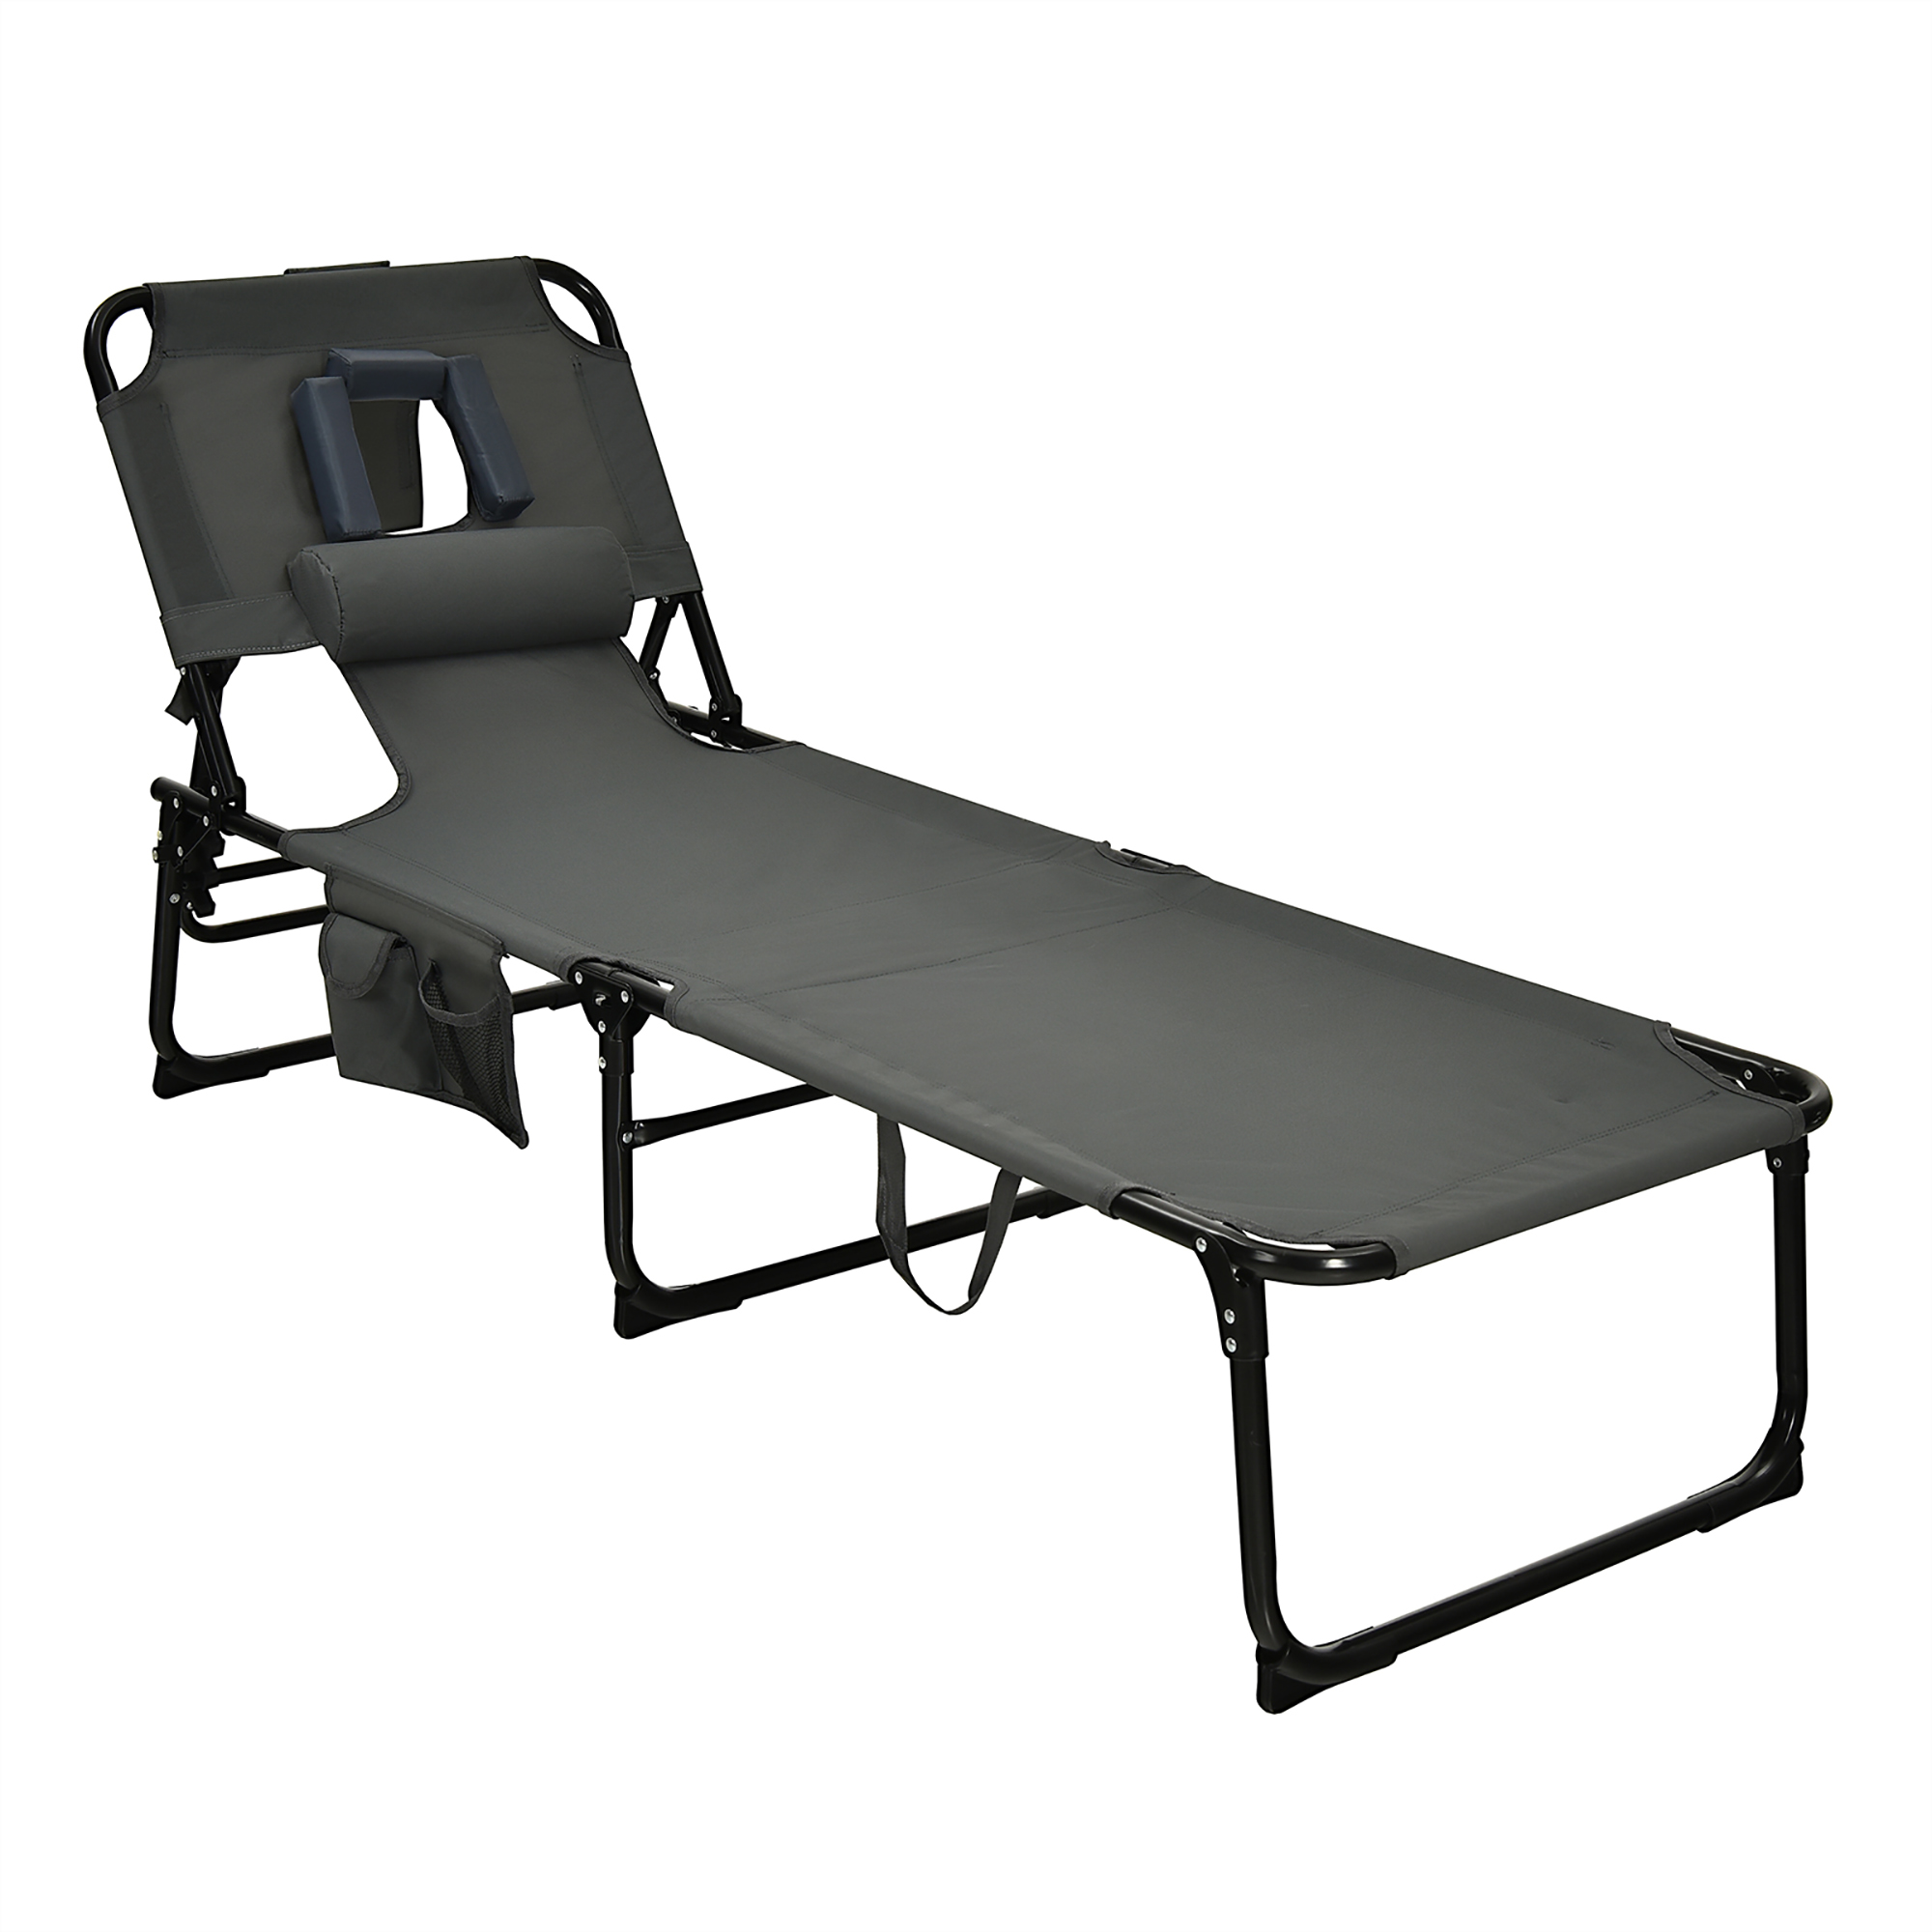 Goplus Outdoor Beach Lounge Chair Folding Chaise Lounge with Pillow Grey - image 2 of 8